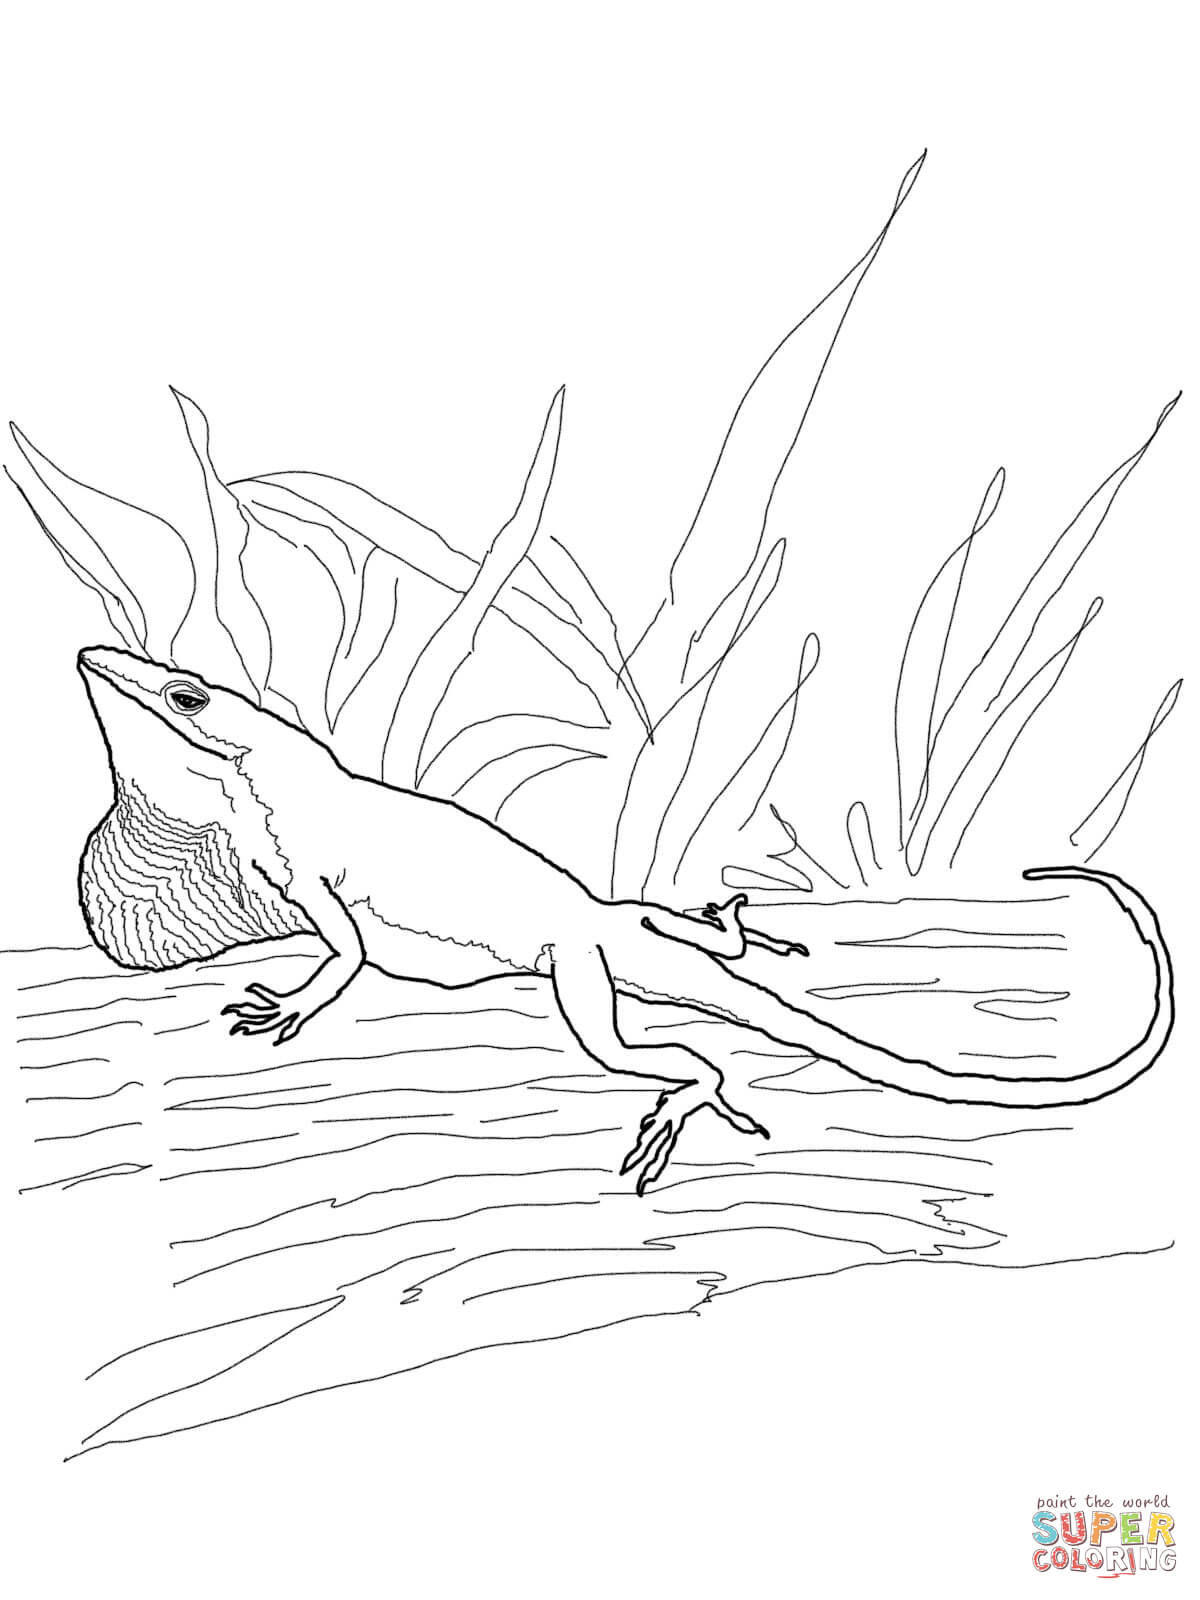 Green Anole coloring #9, Download drawings